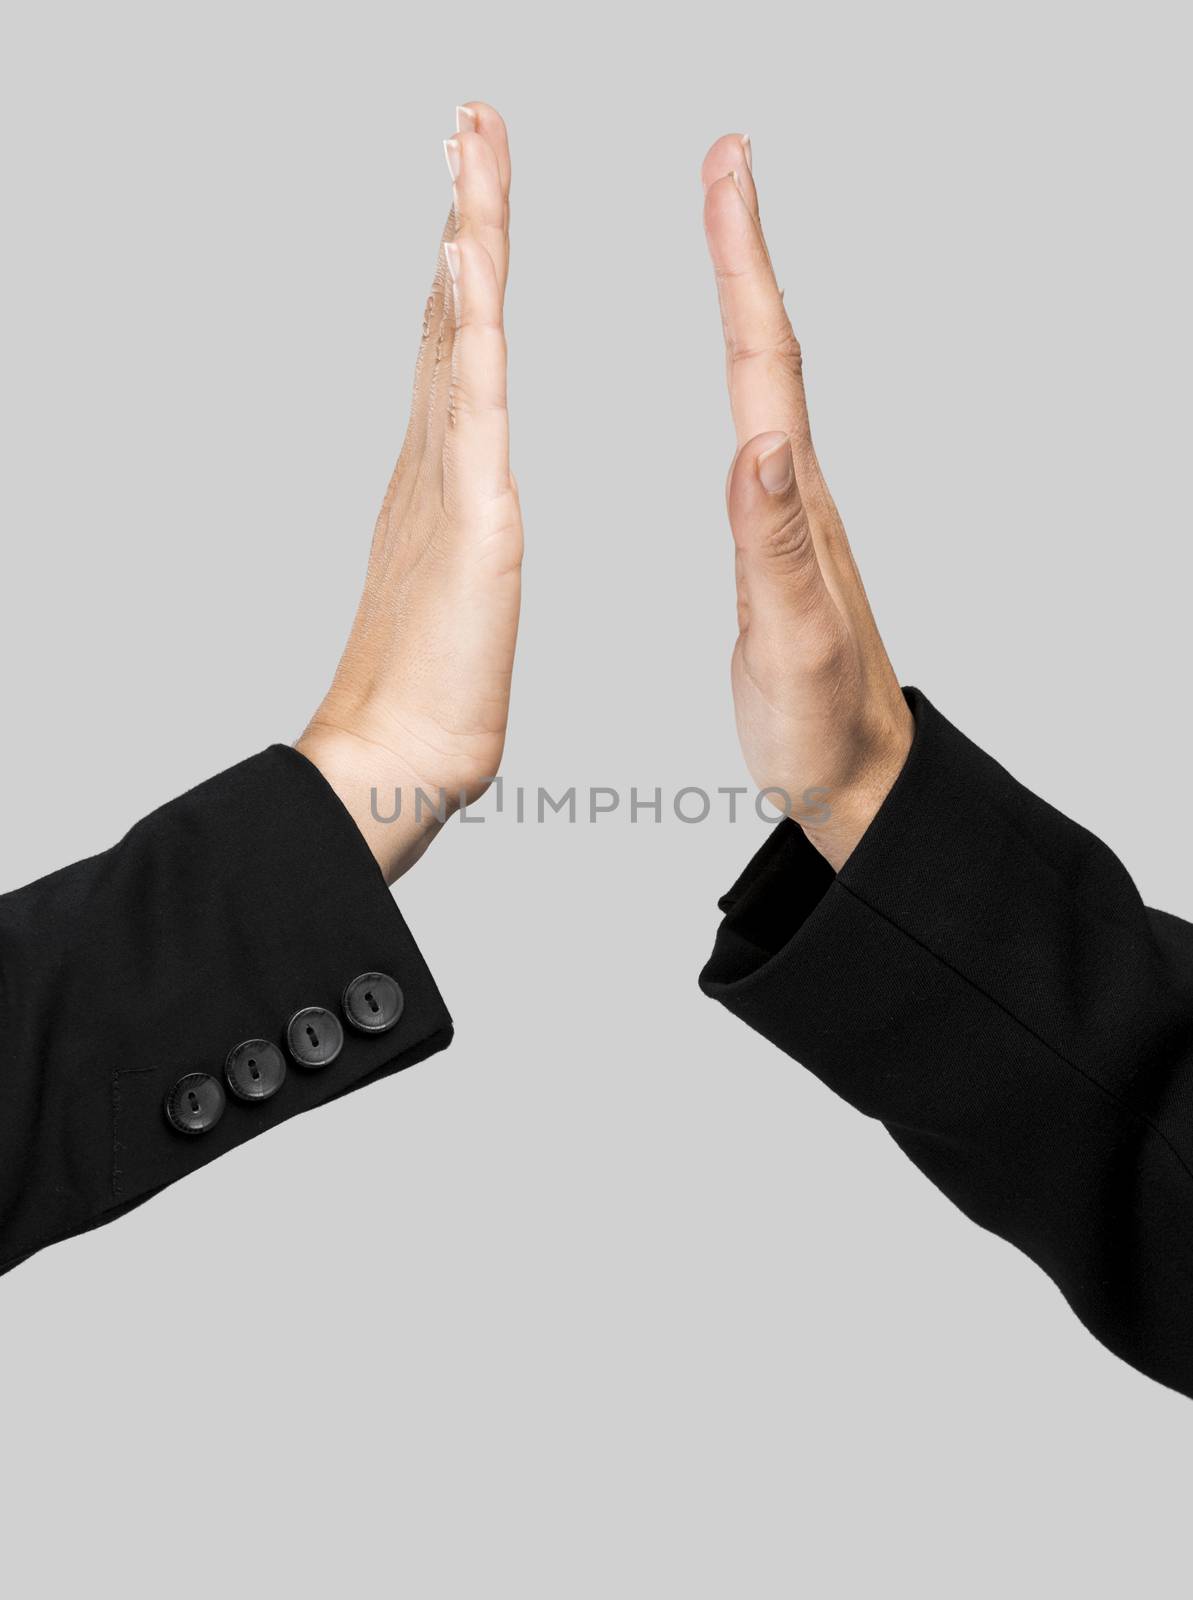 Hands making a give me five compliment over a gray background